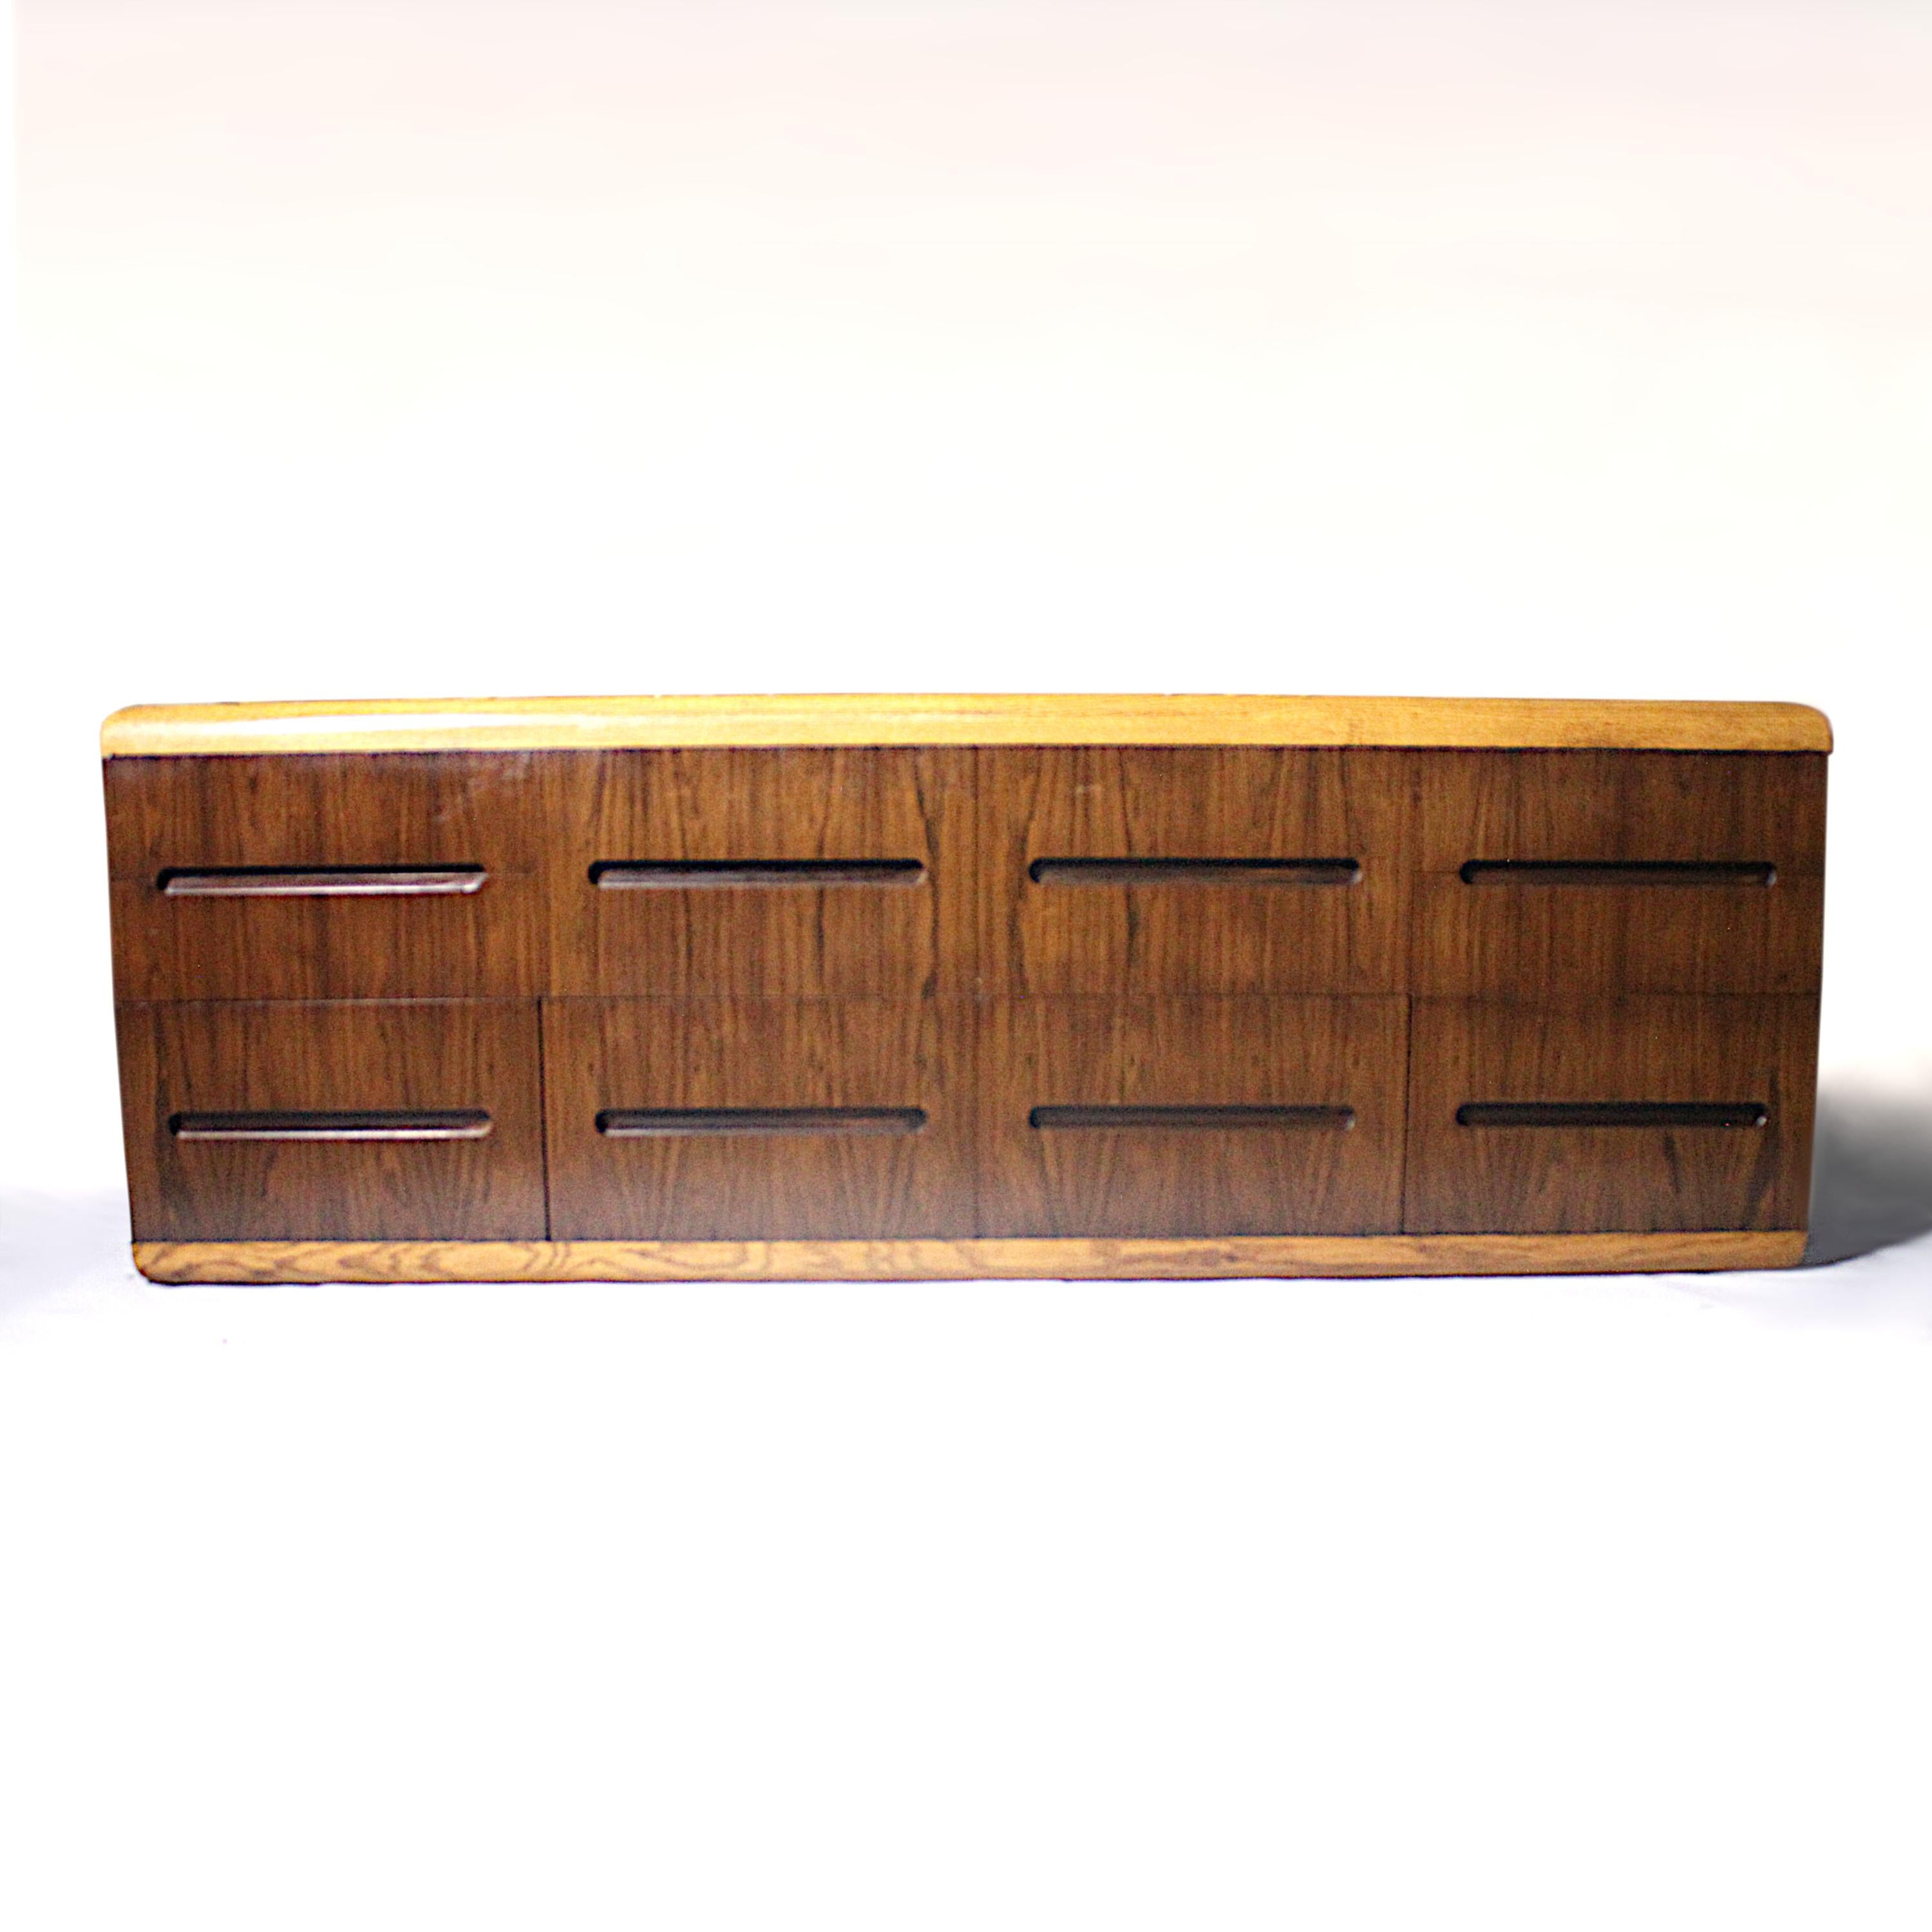 Varnished Vintage 1970s Mid-Century Modern Rosewood and Oak Credenza Buffet by Dunbar